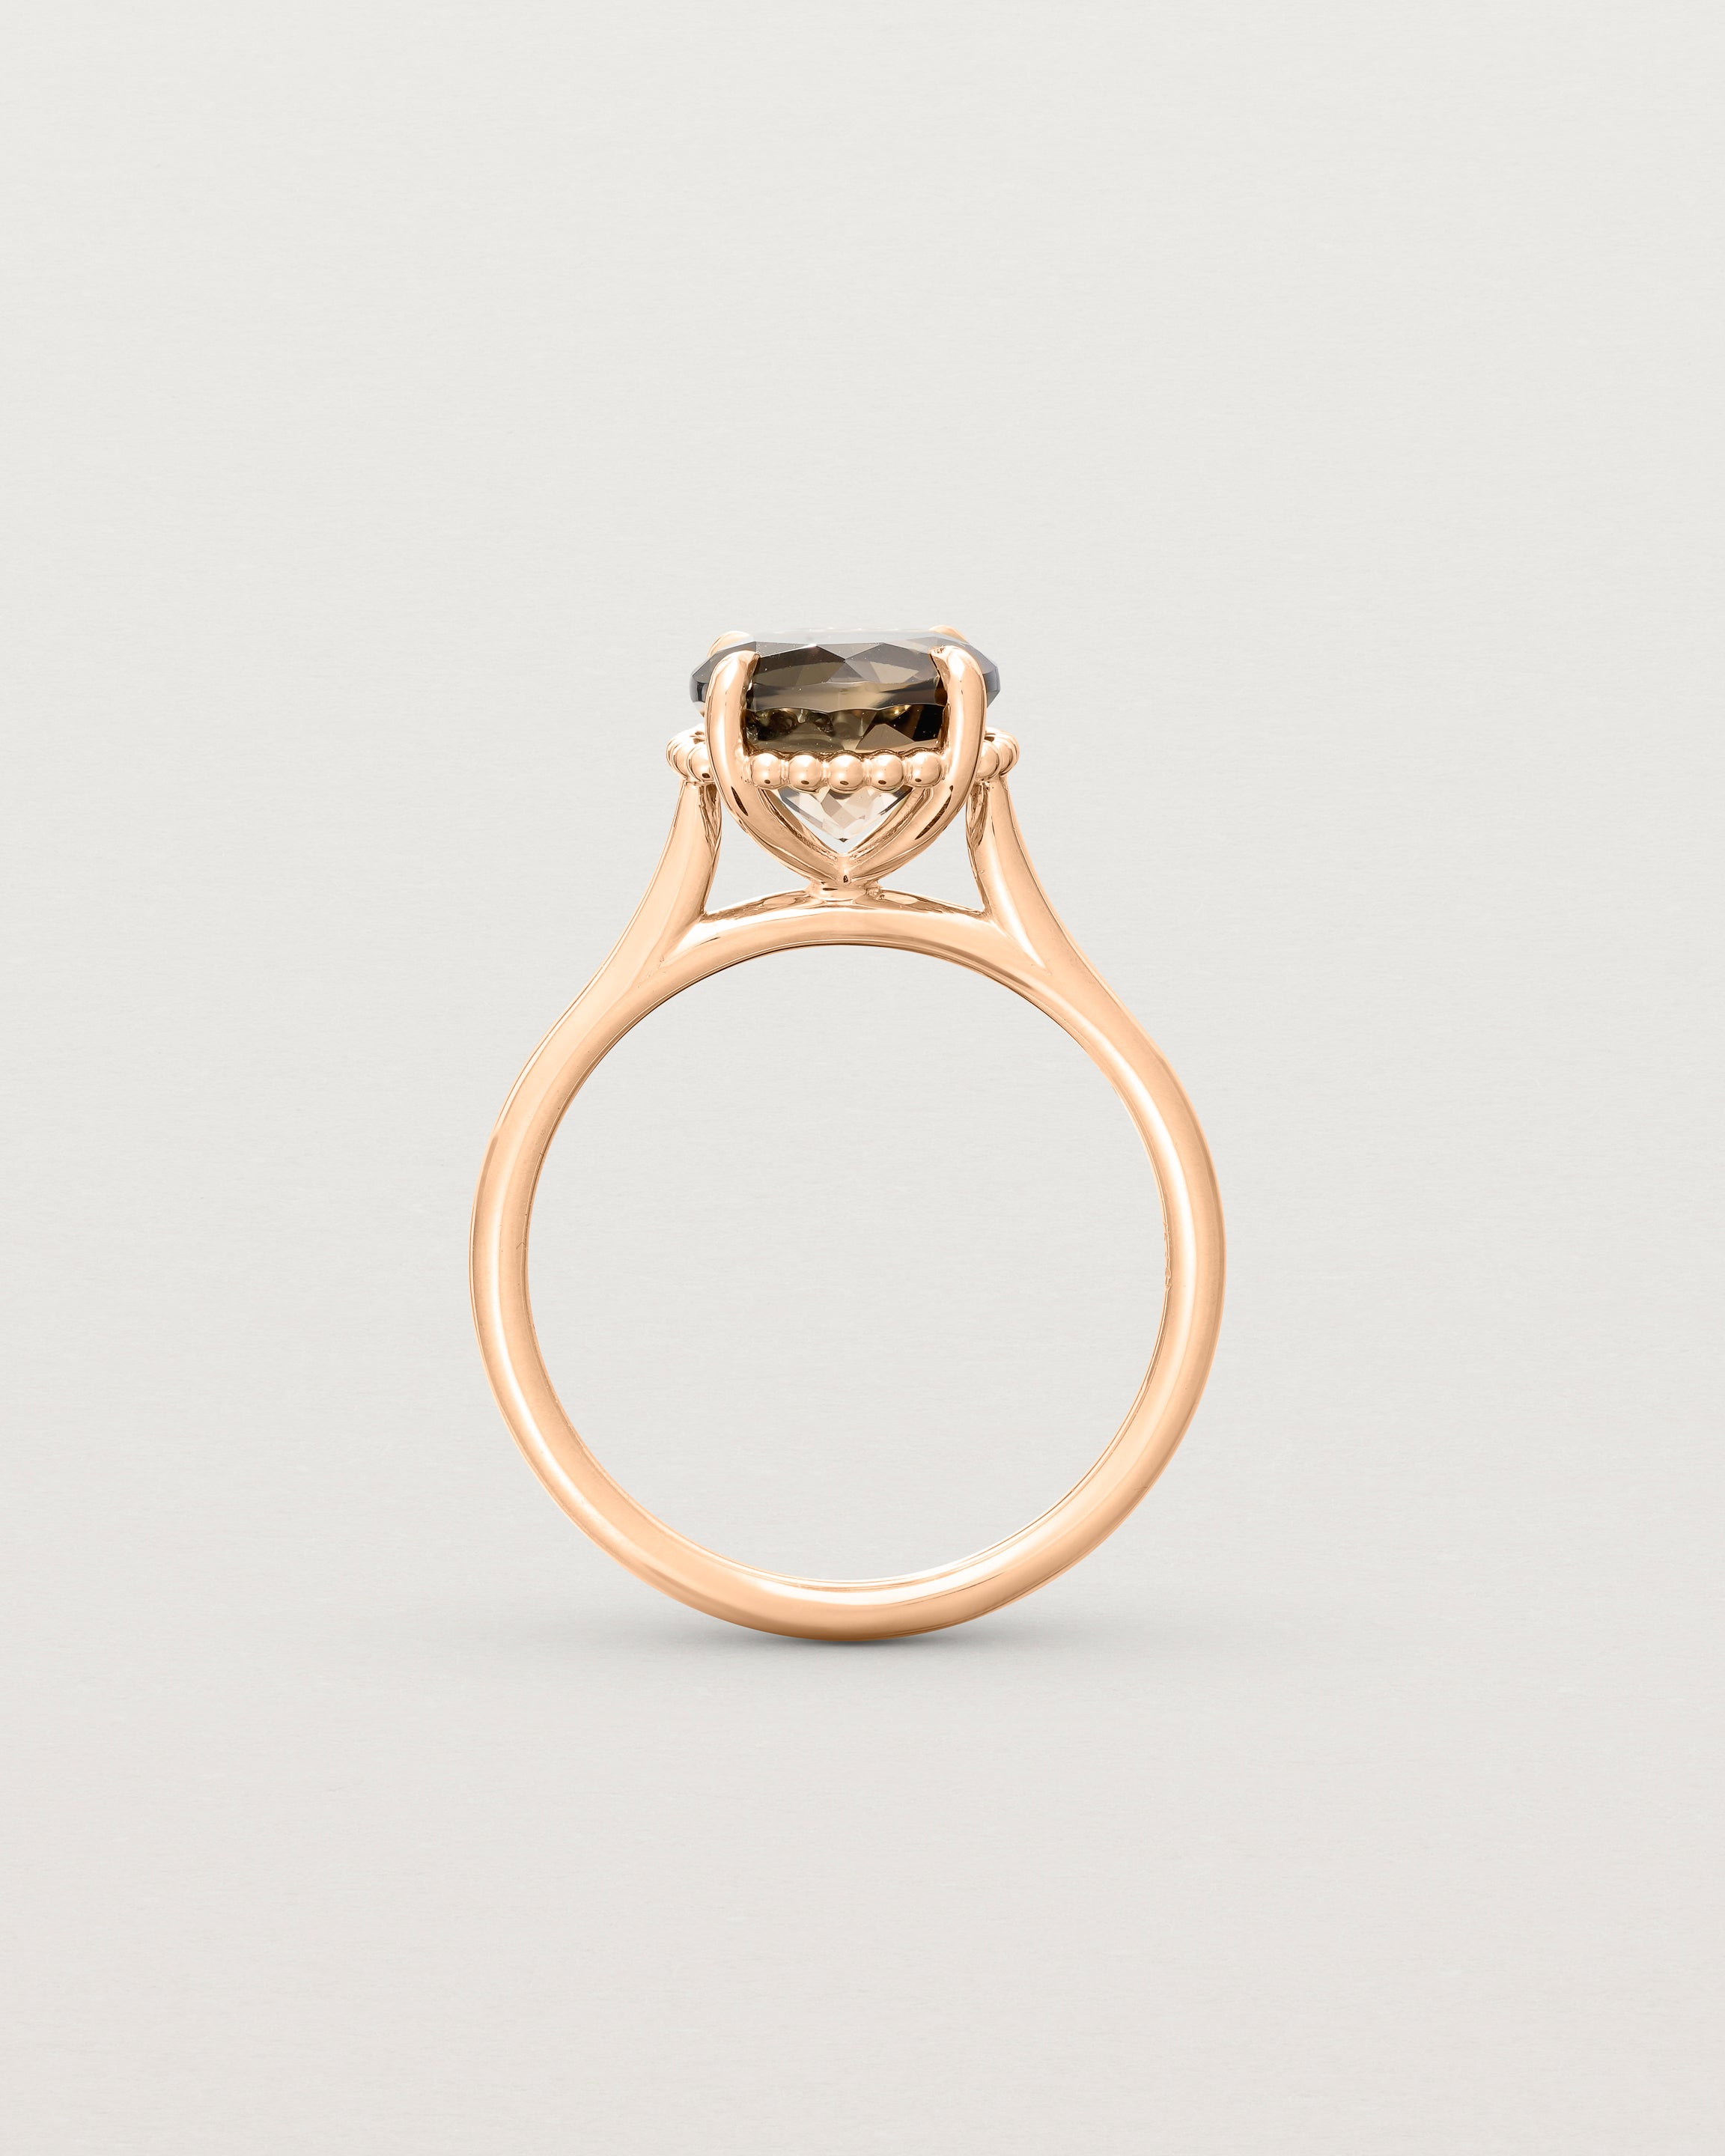 Standing view of the Thea Round Solitaire | Smokey Quartz in rose gold.